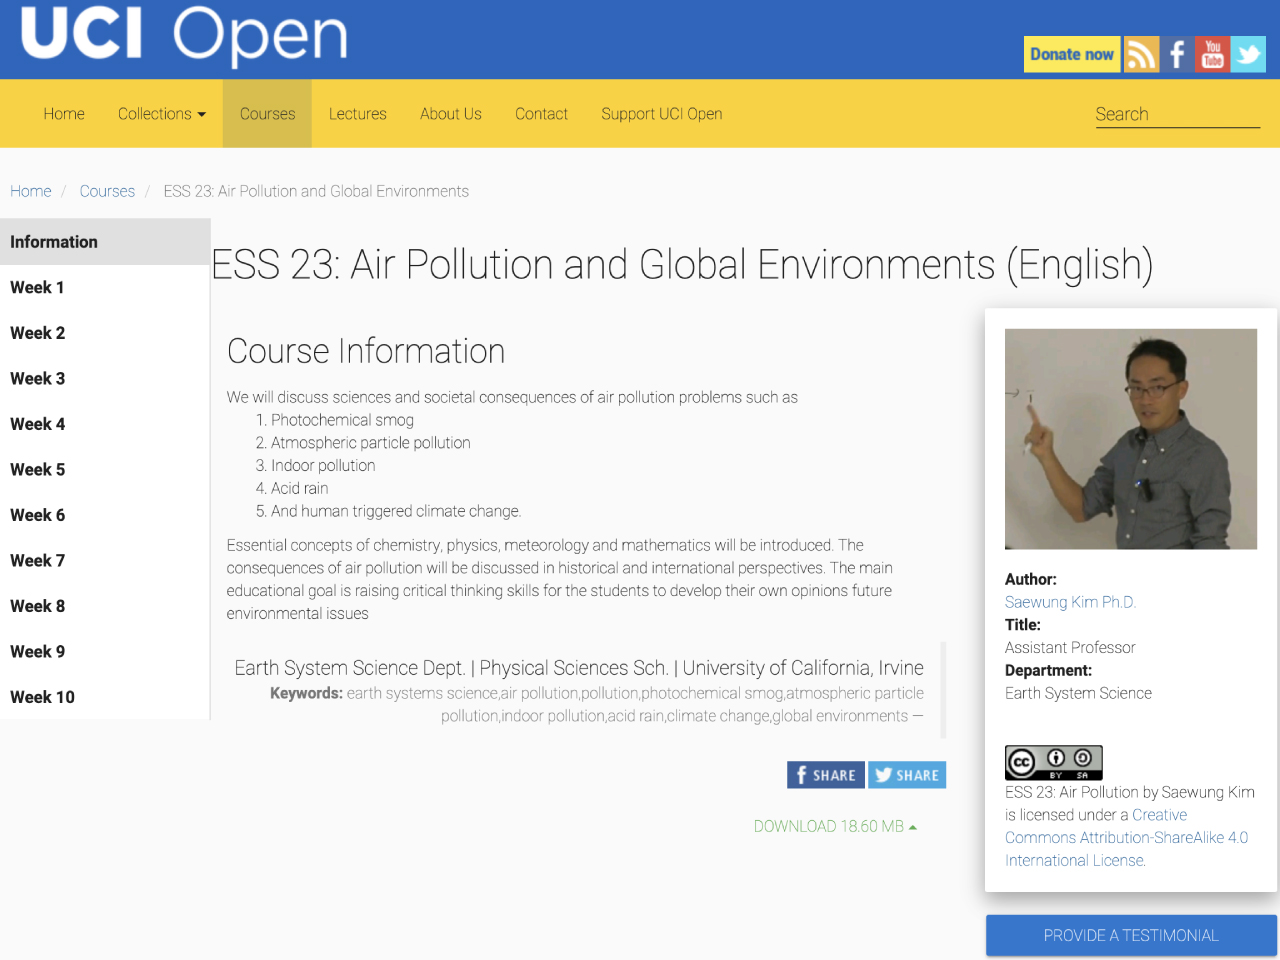 ESS 23: Air Pollution and Global Environments